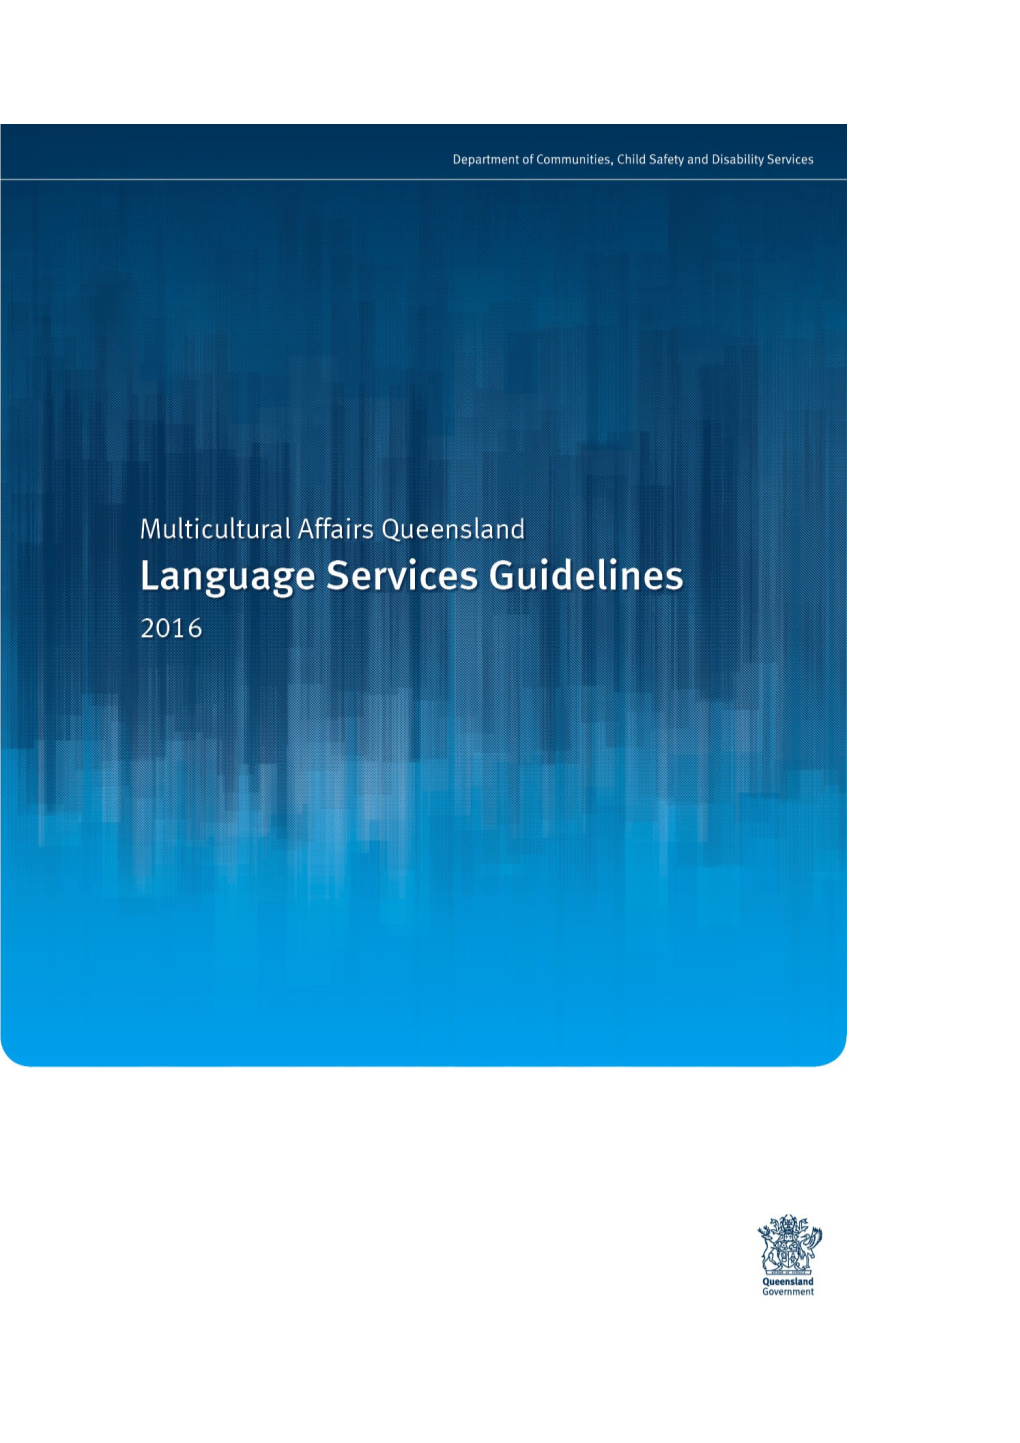 Language Services Guidelines